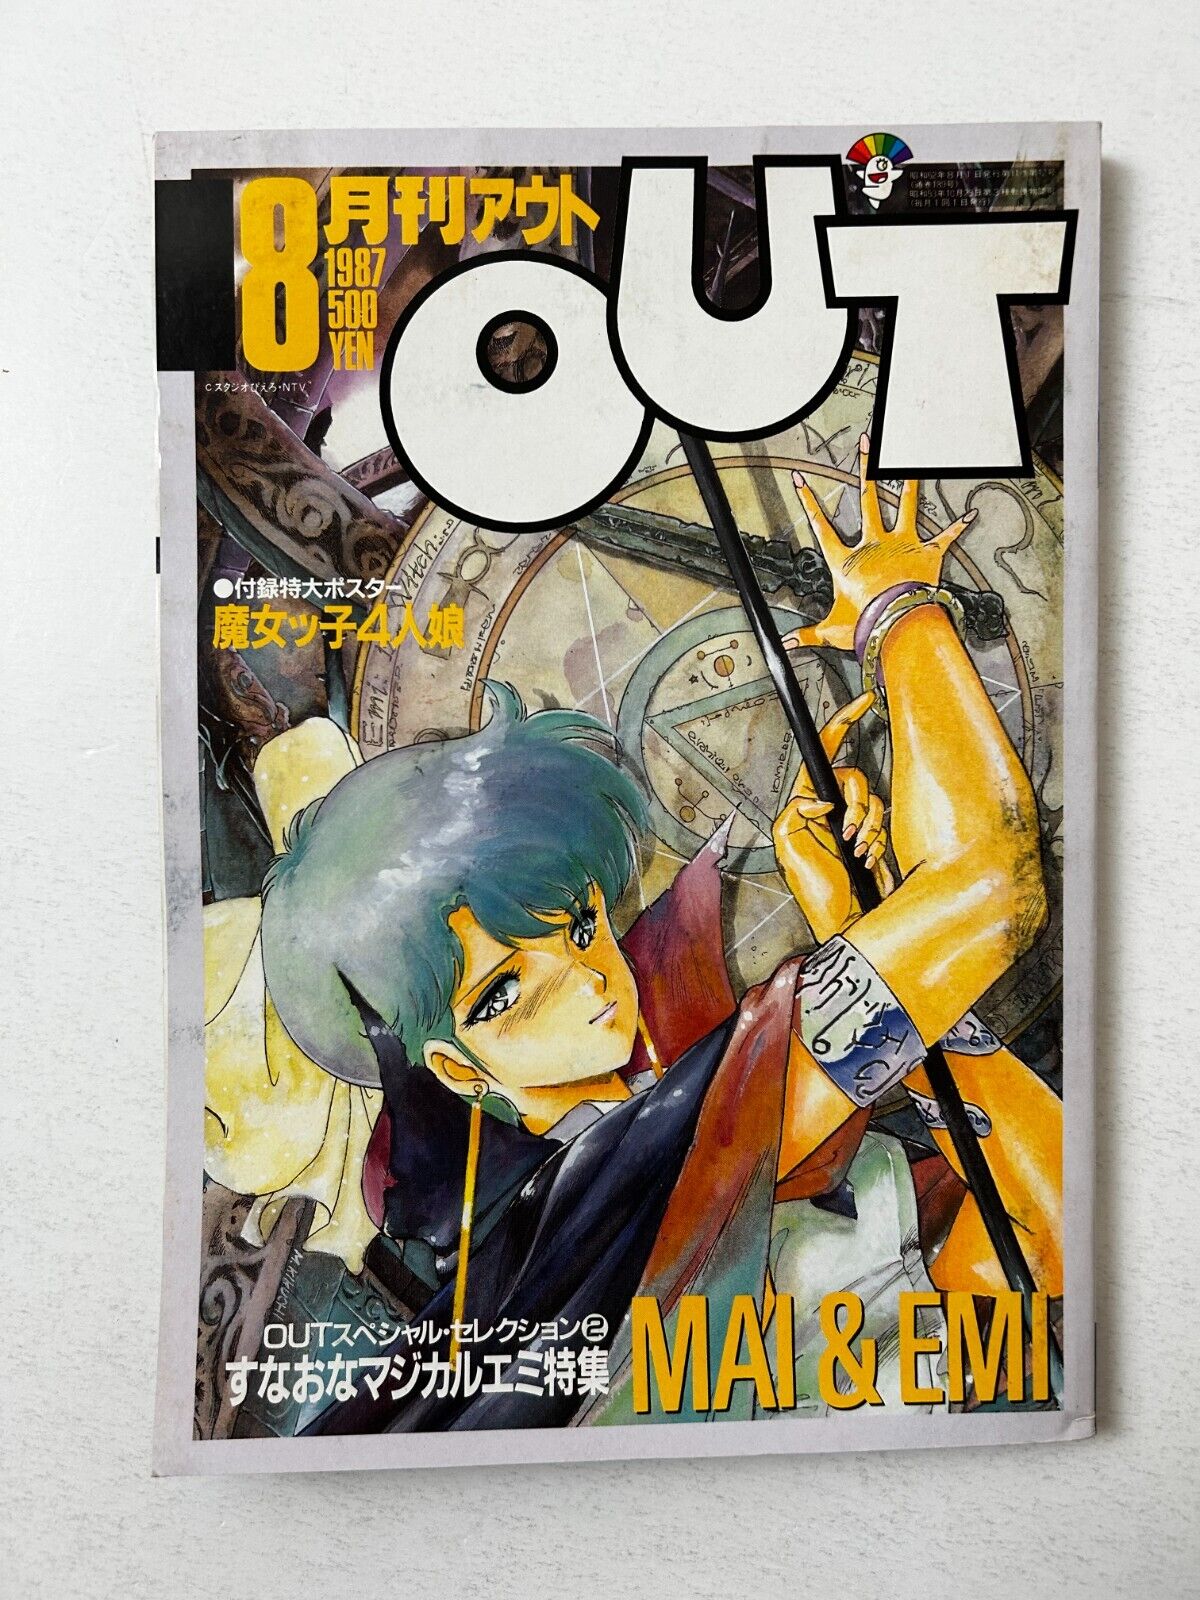 MONTHLY OUT August 1987 Anime Manga Comic Magazine Japan Japanese